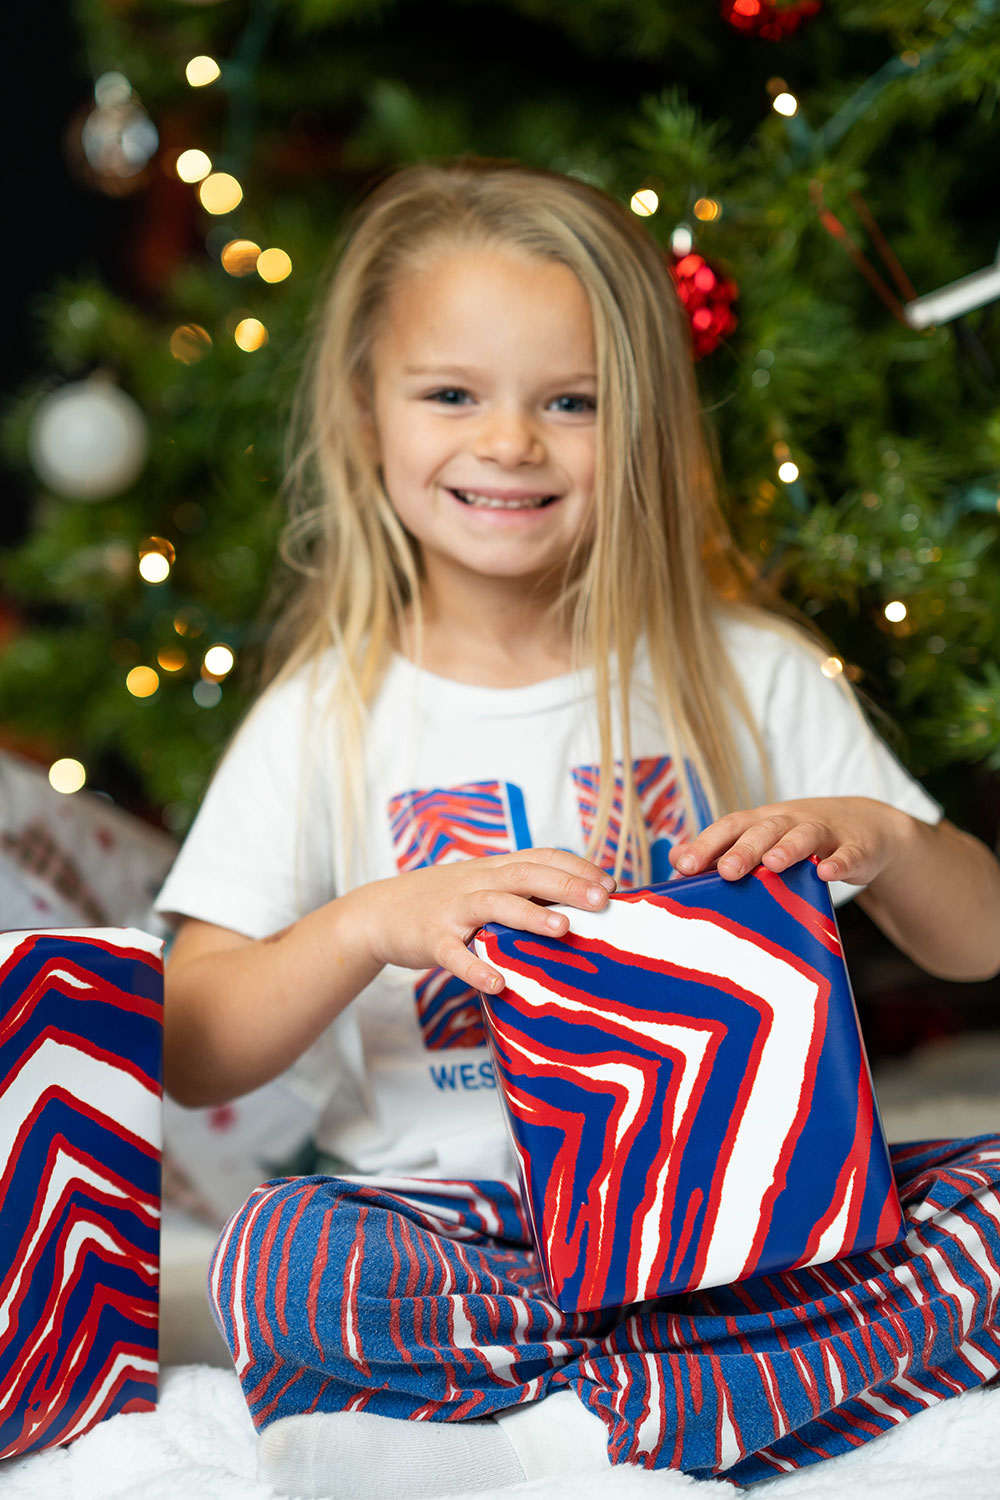 "Zubaz" Wrapping Paper